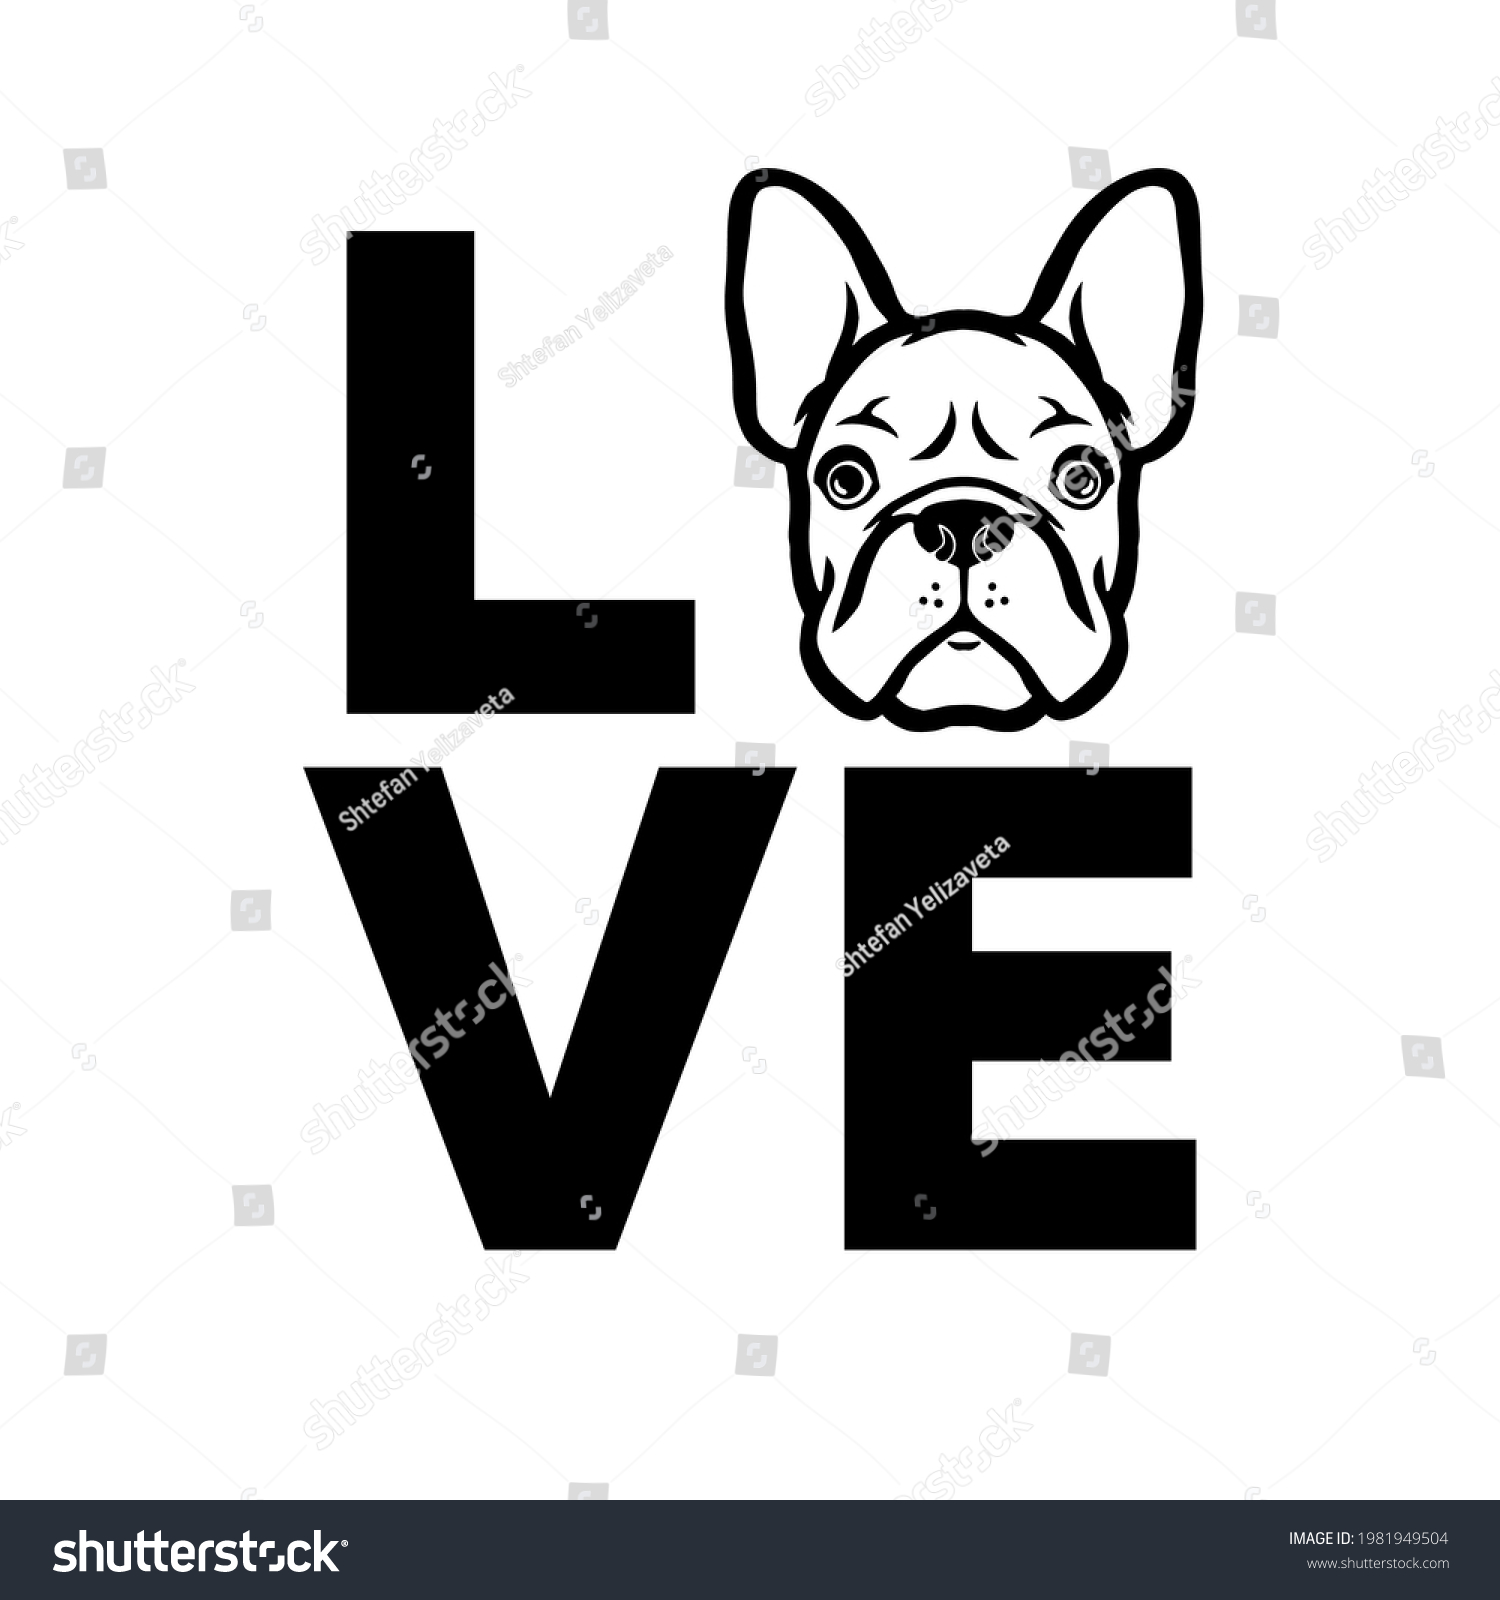 SVG of French Bulldog head and text LOVE. Vector illustration for t-shirt design and other svg